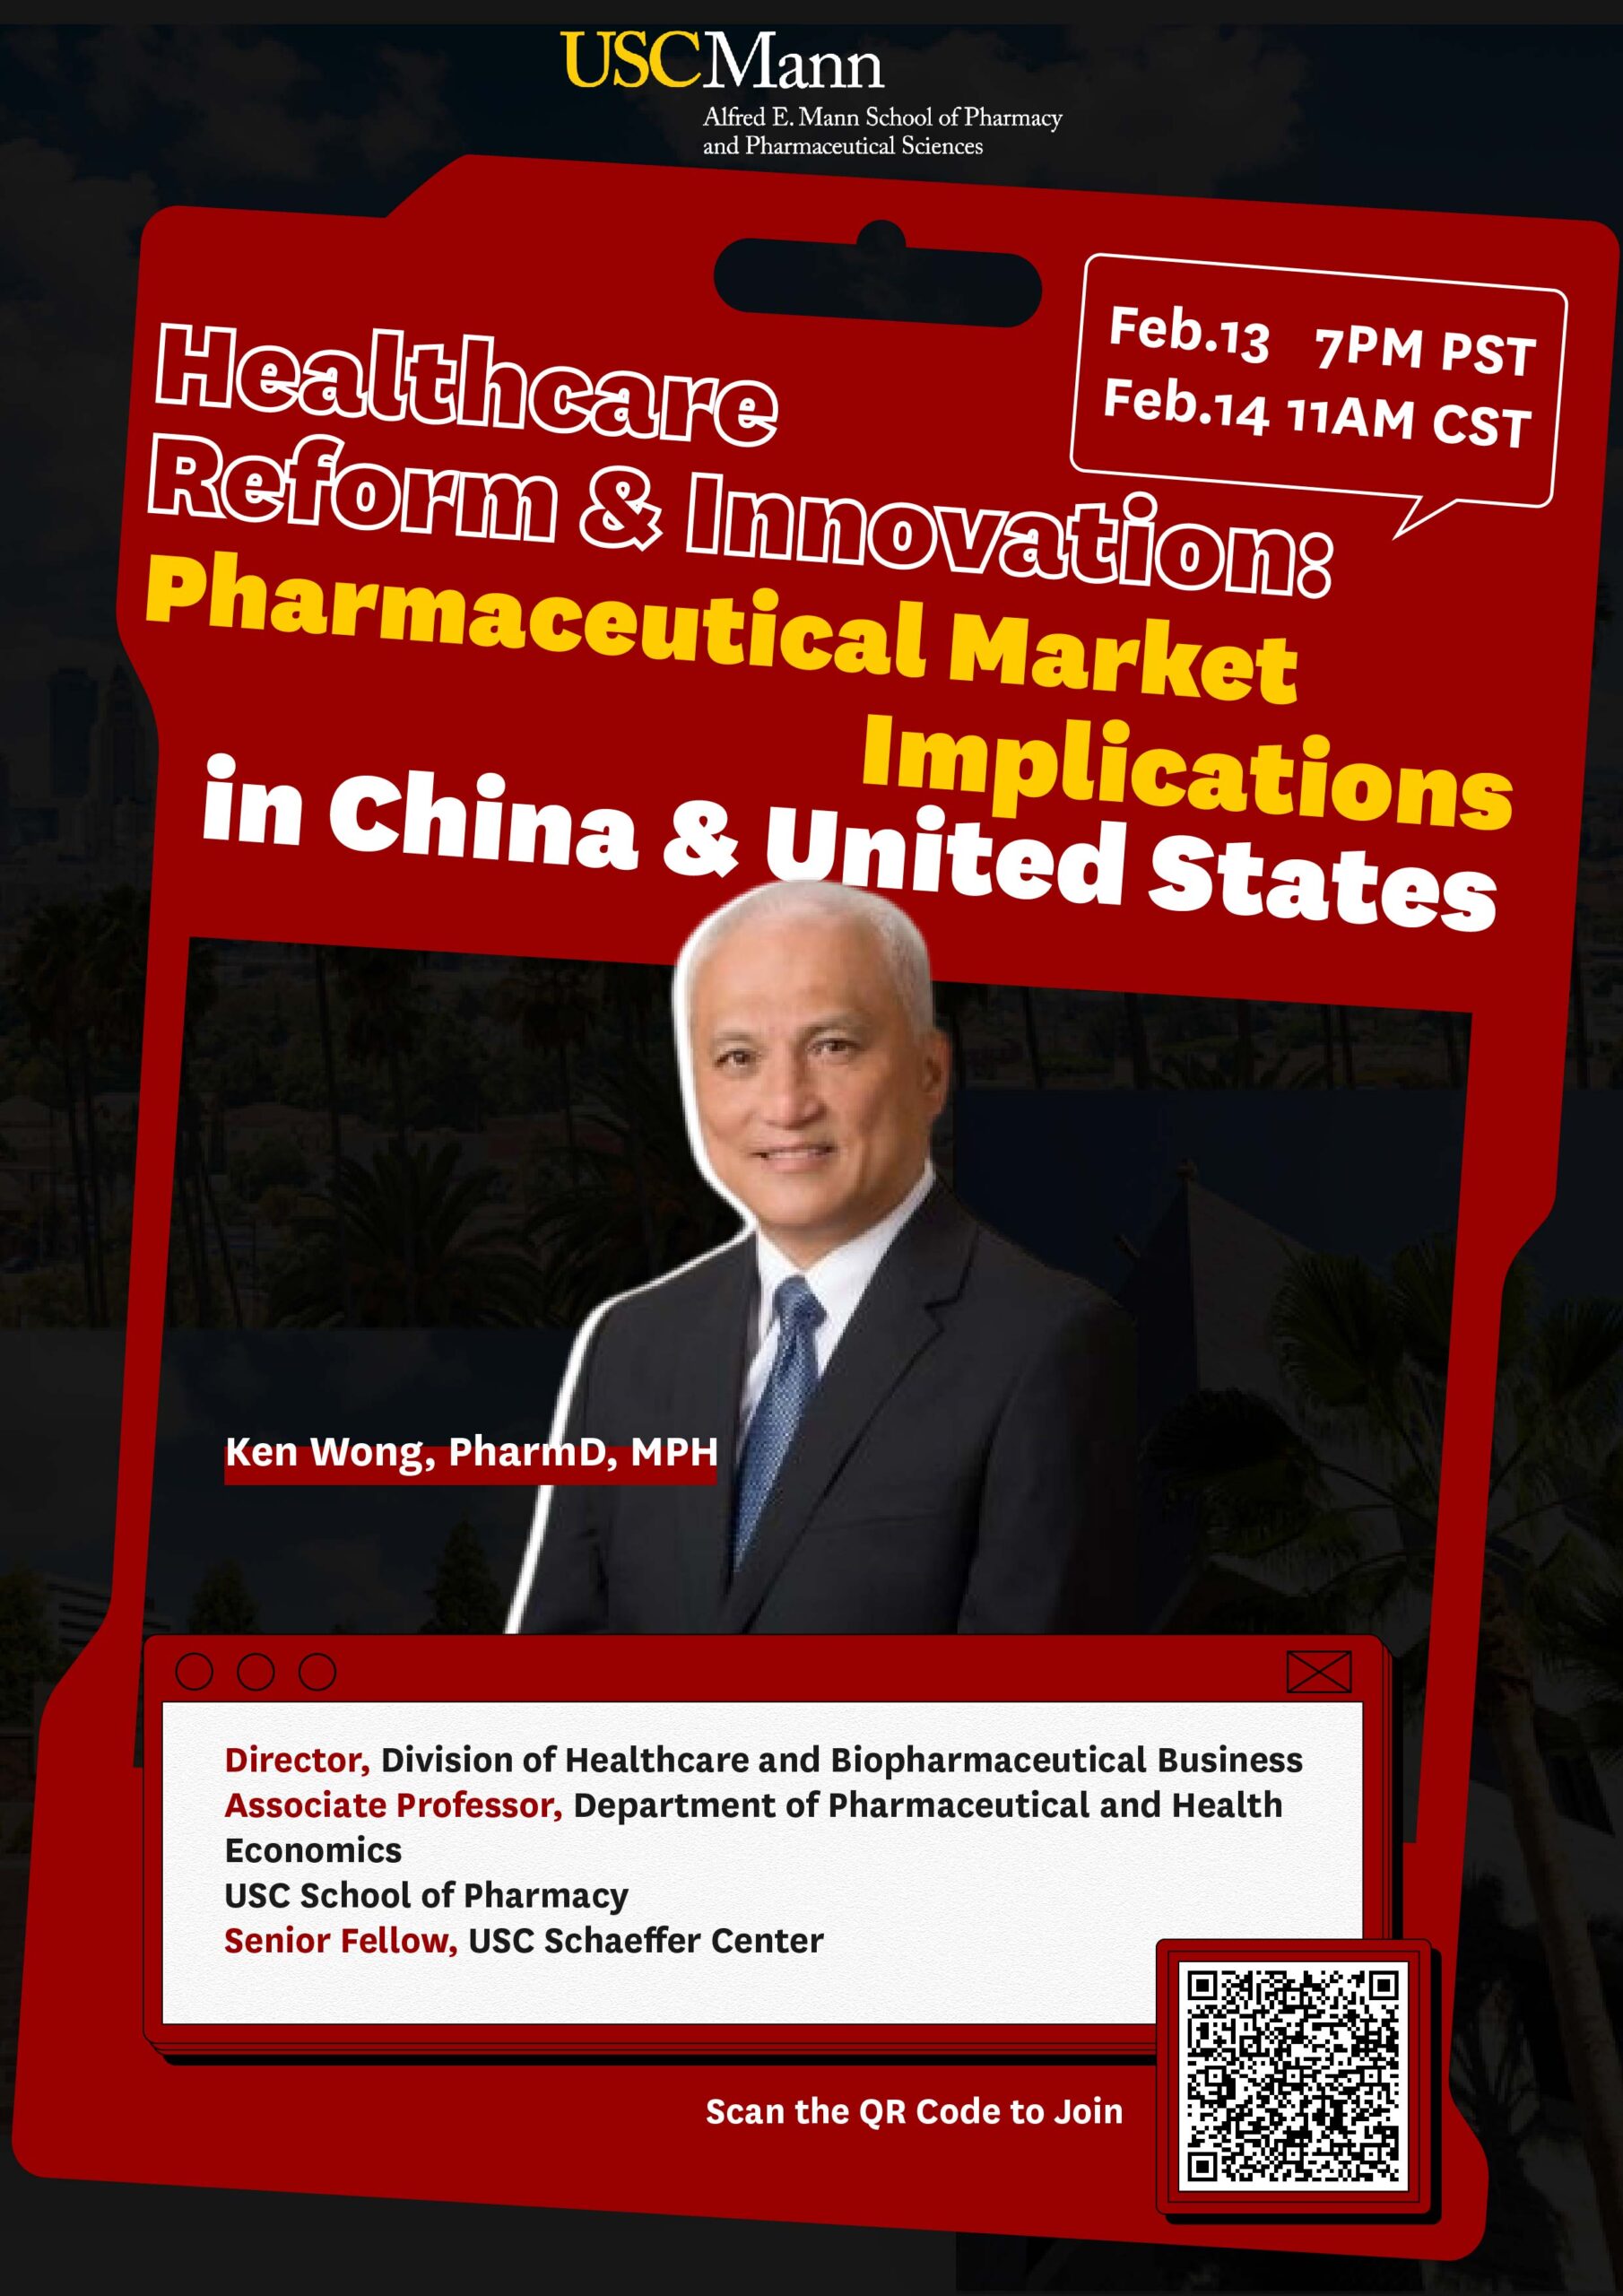 Healthcare Reform & Innovation: Pharmaceutical Market Implications in China & United States